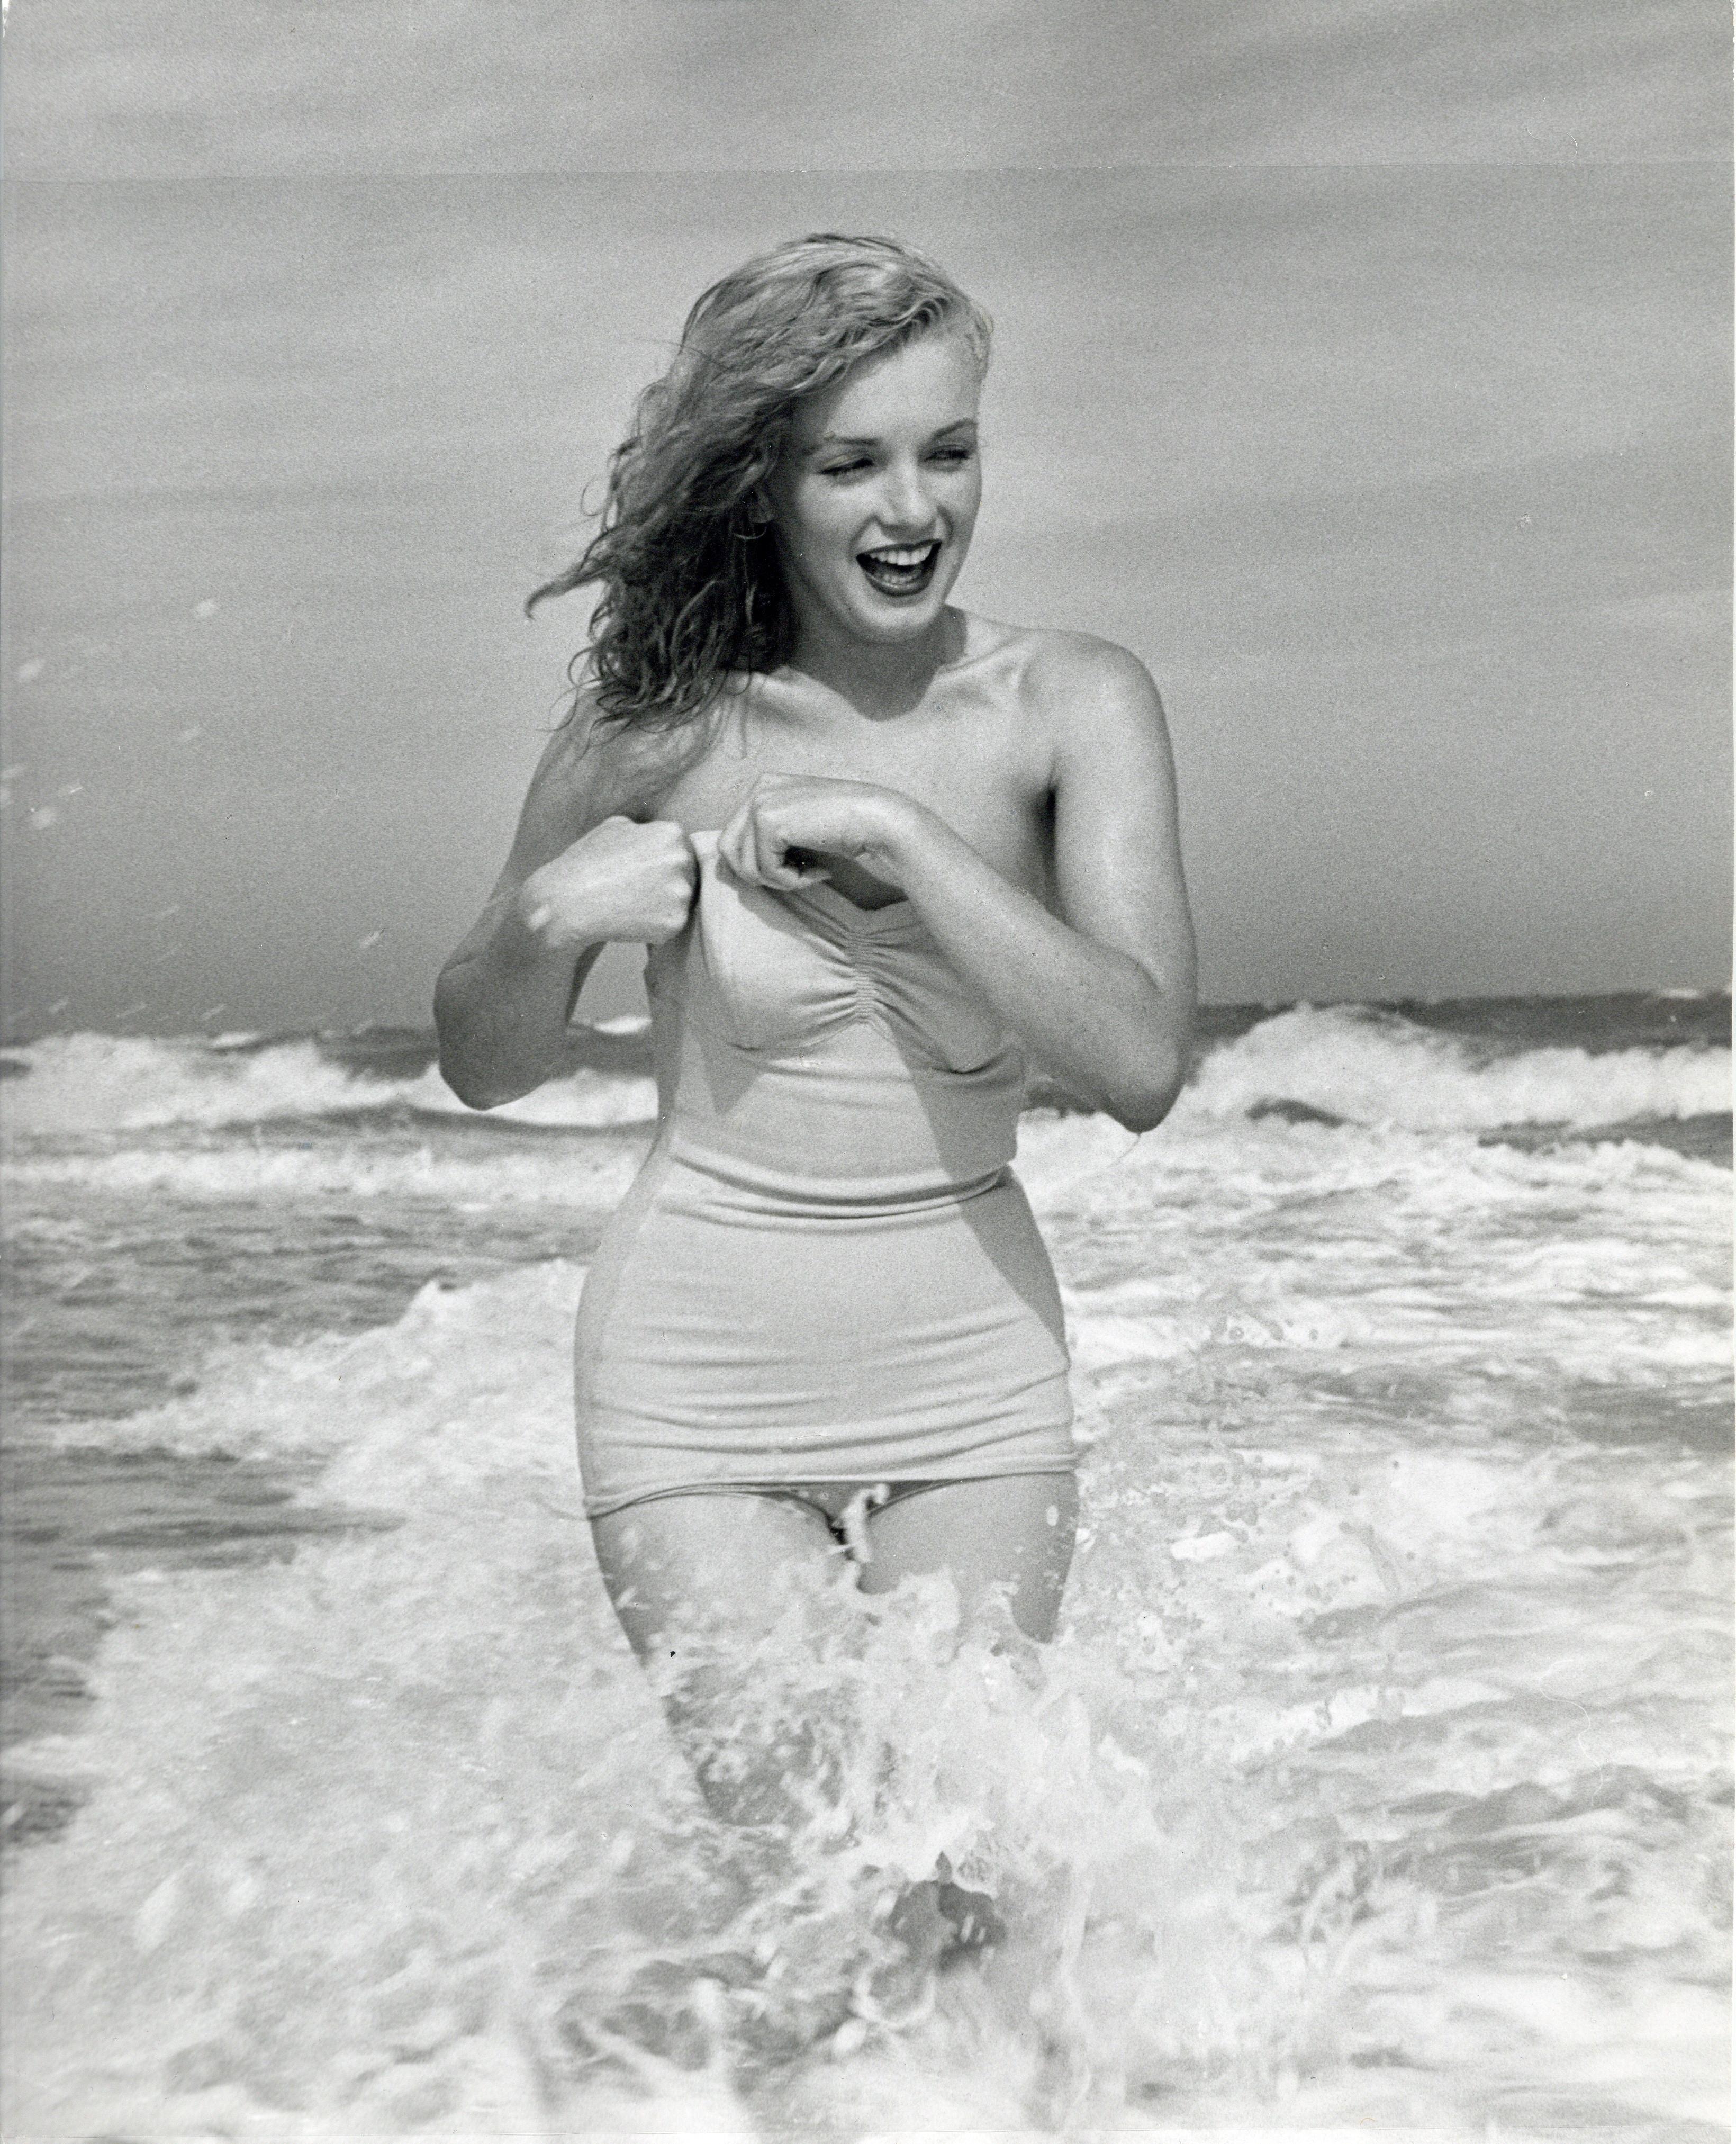 Andre de Dienes Black and White Photograph - Marilyn Monroe Laughing in the Ocean Vintage Original Photograph